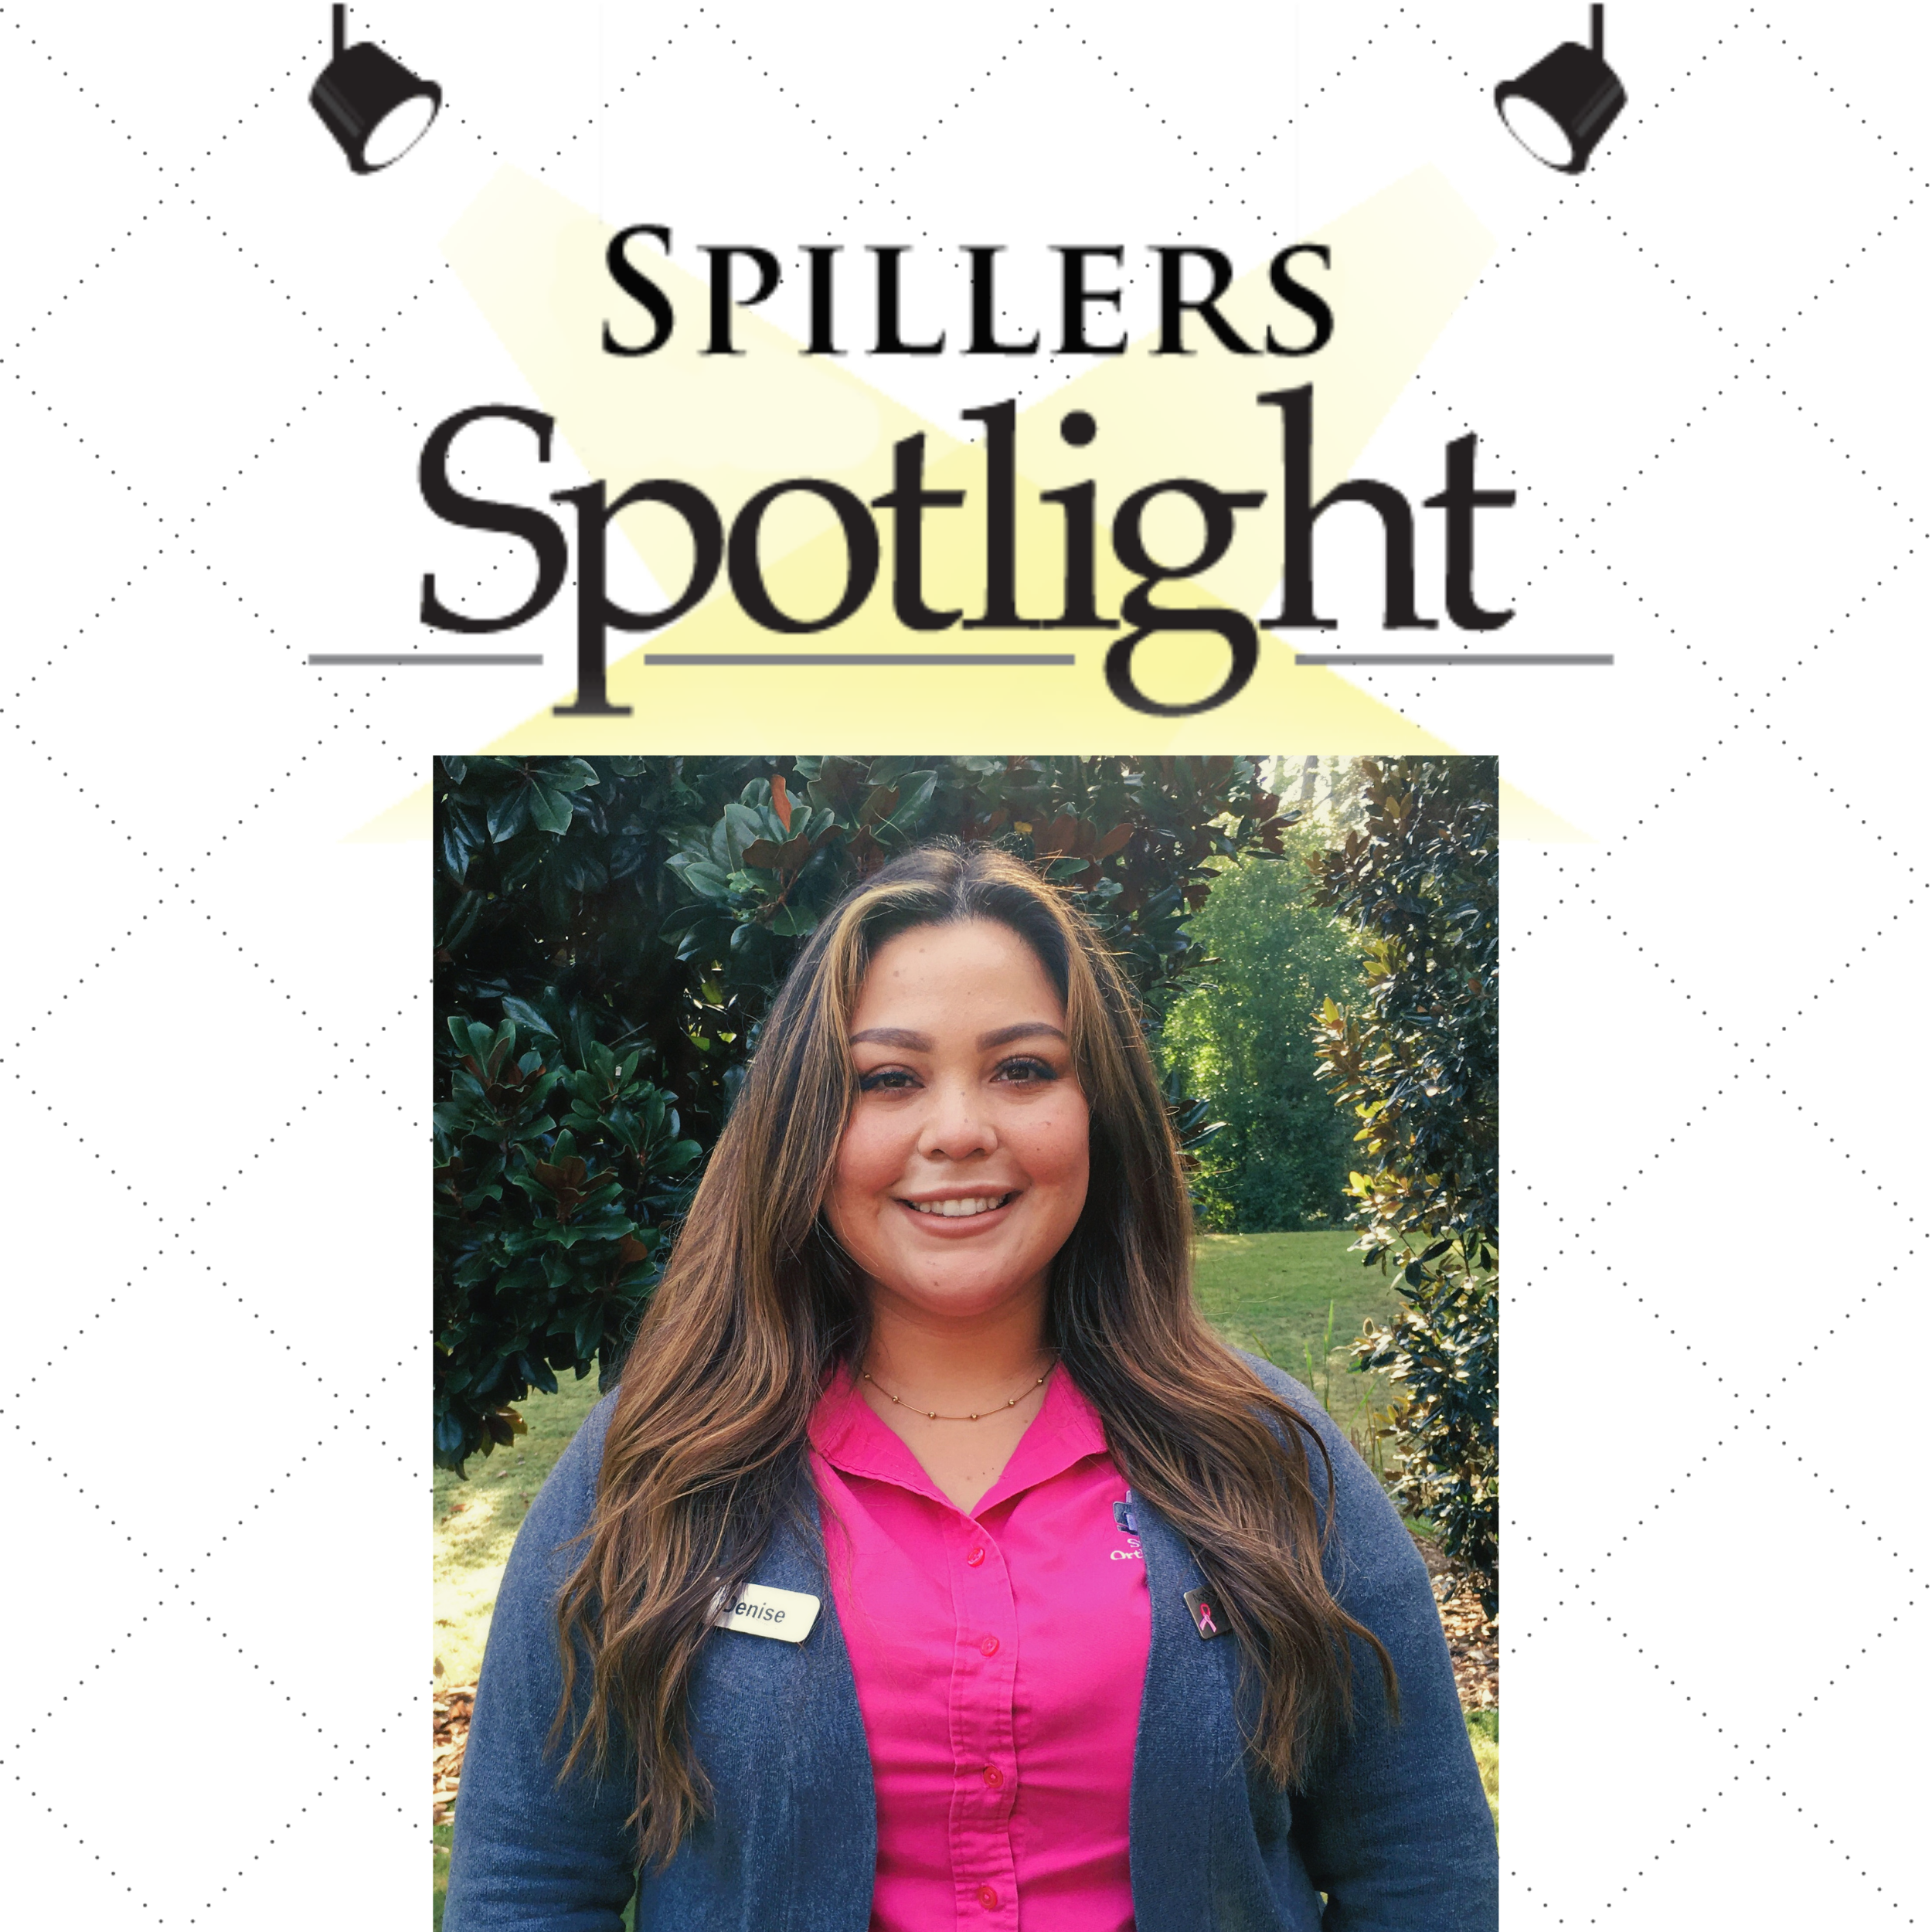 Our Patient Coordinator, Denise, is in the Spillers Spotlight